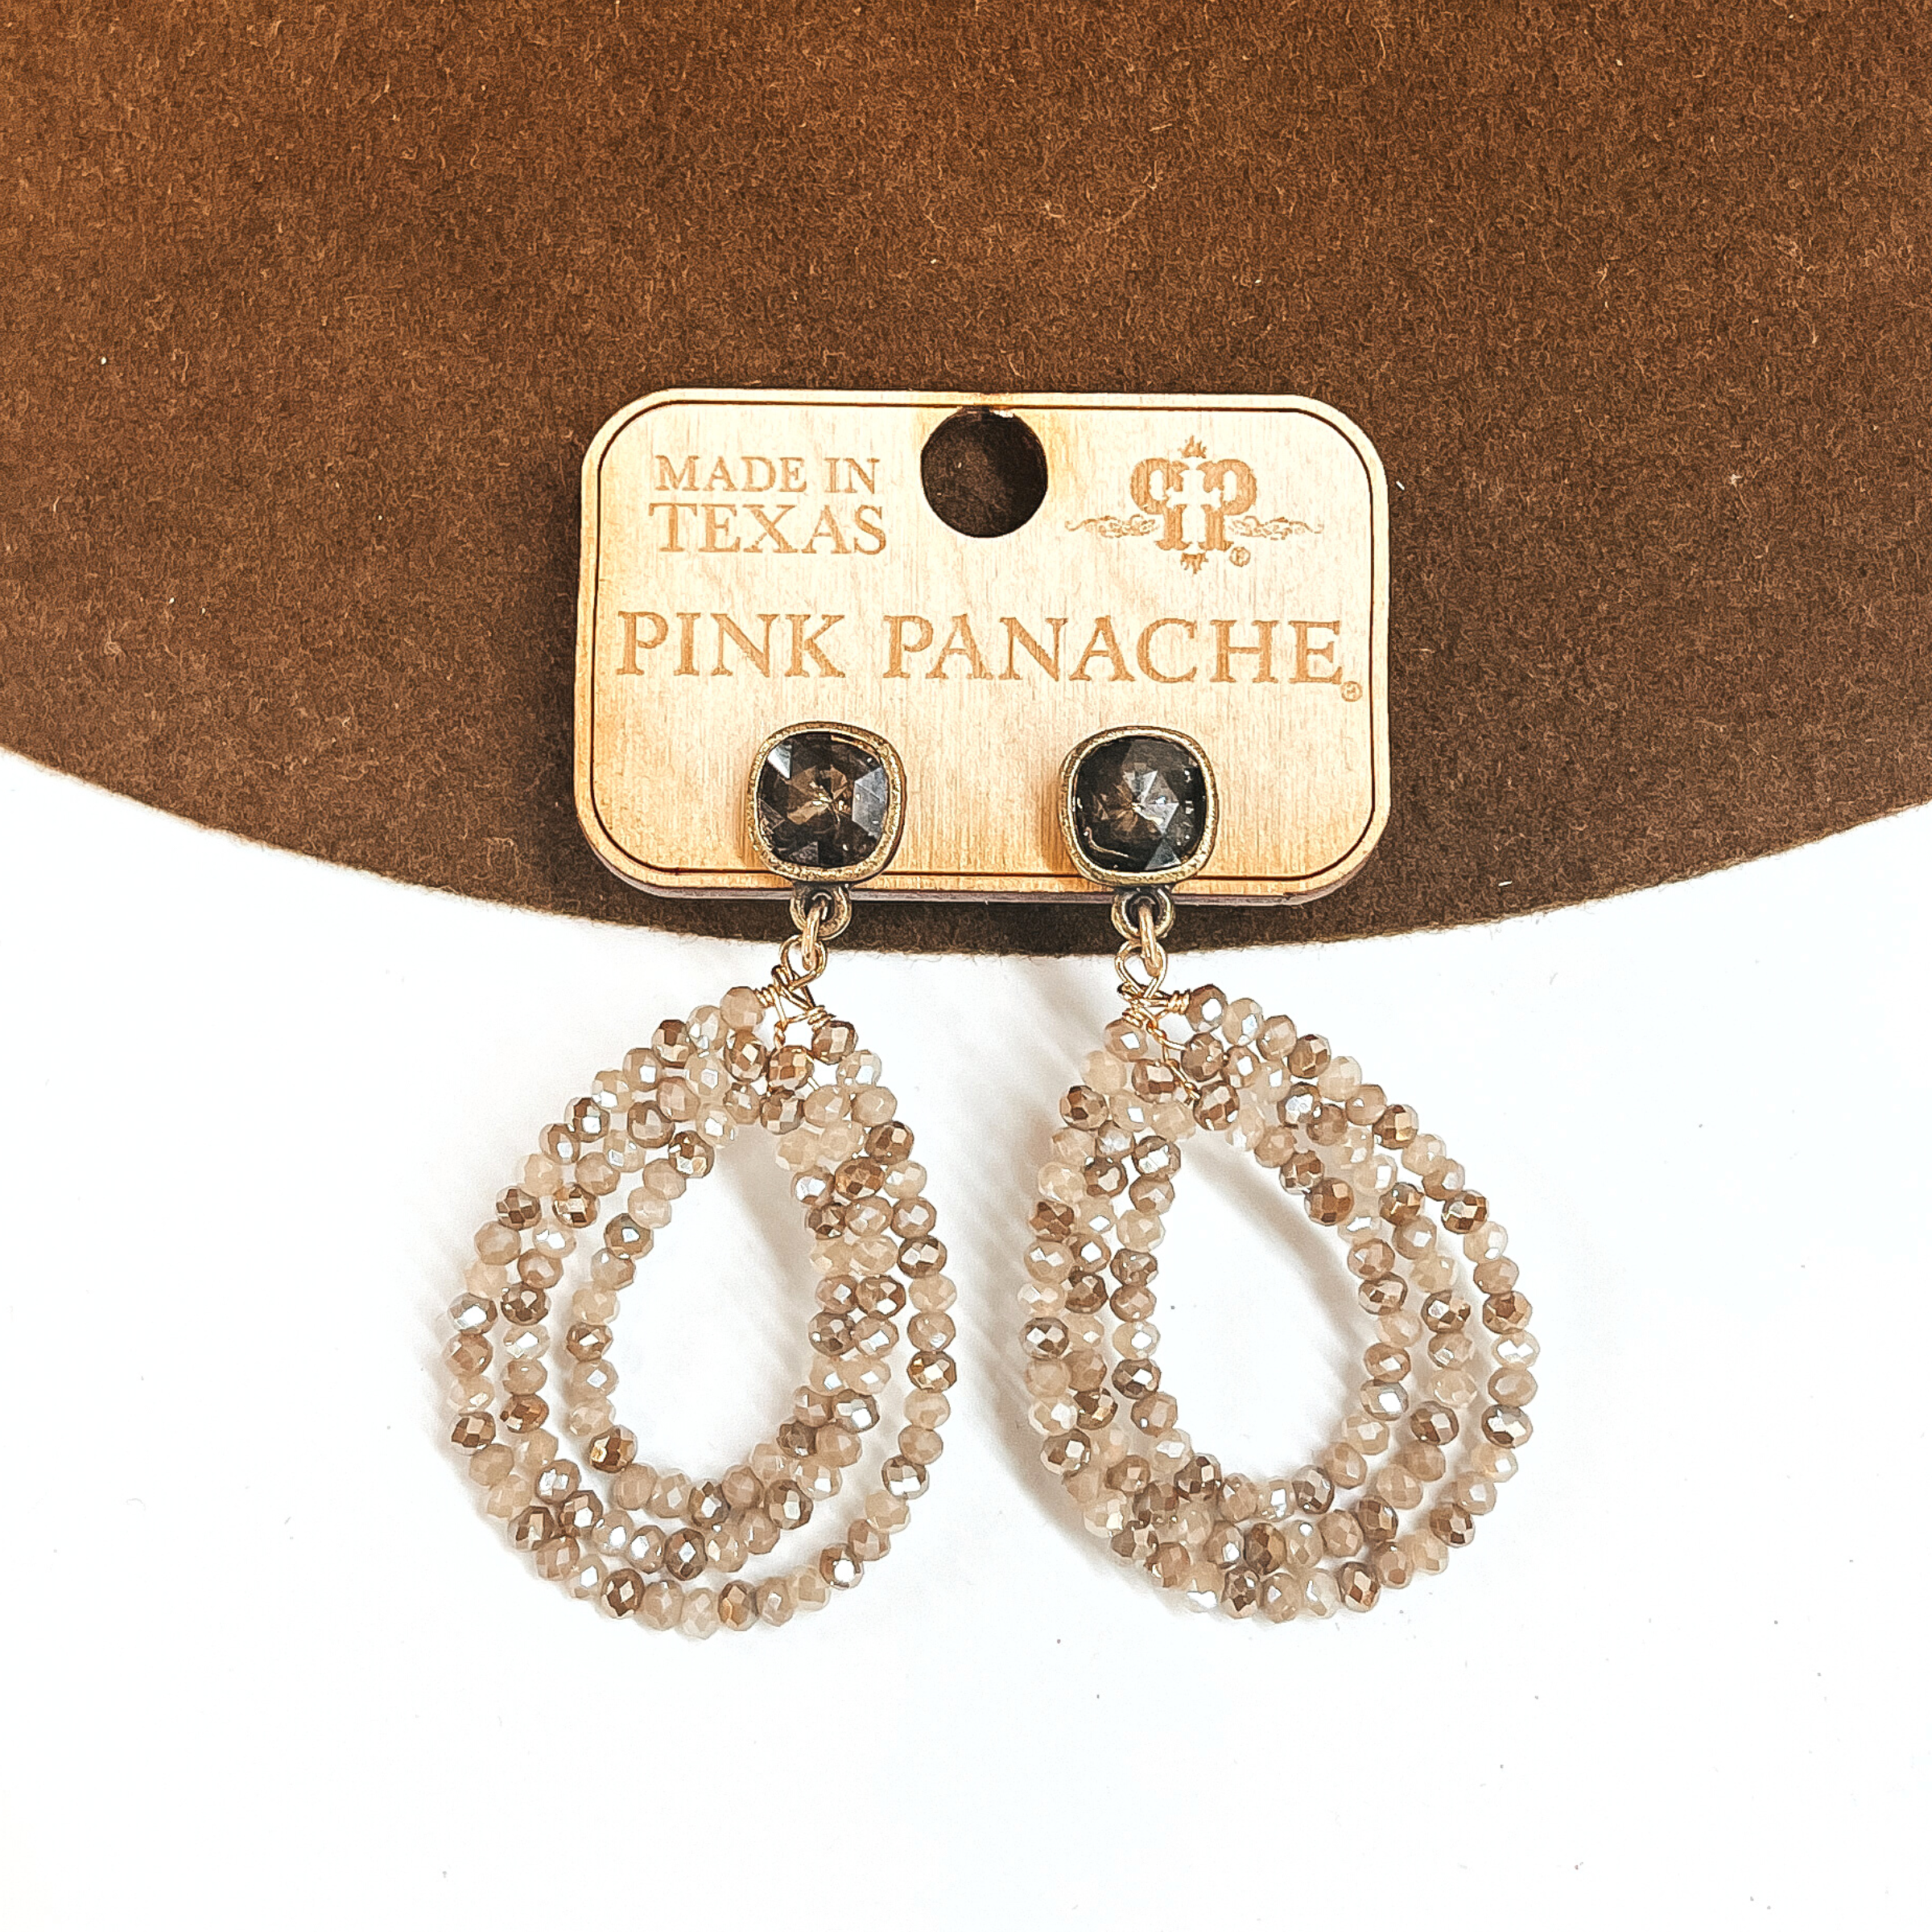 Pink Panache | Light Colorado Ignite Cushion Cut Post Earrings with Triple Layered Teardrop in Cream Mix - Giddy Up Glamour Boutique